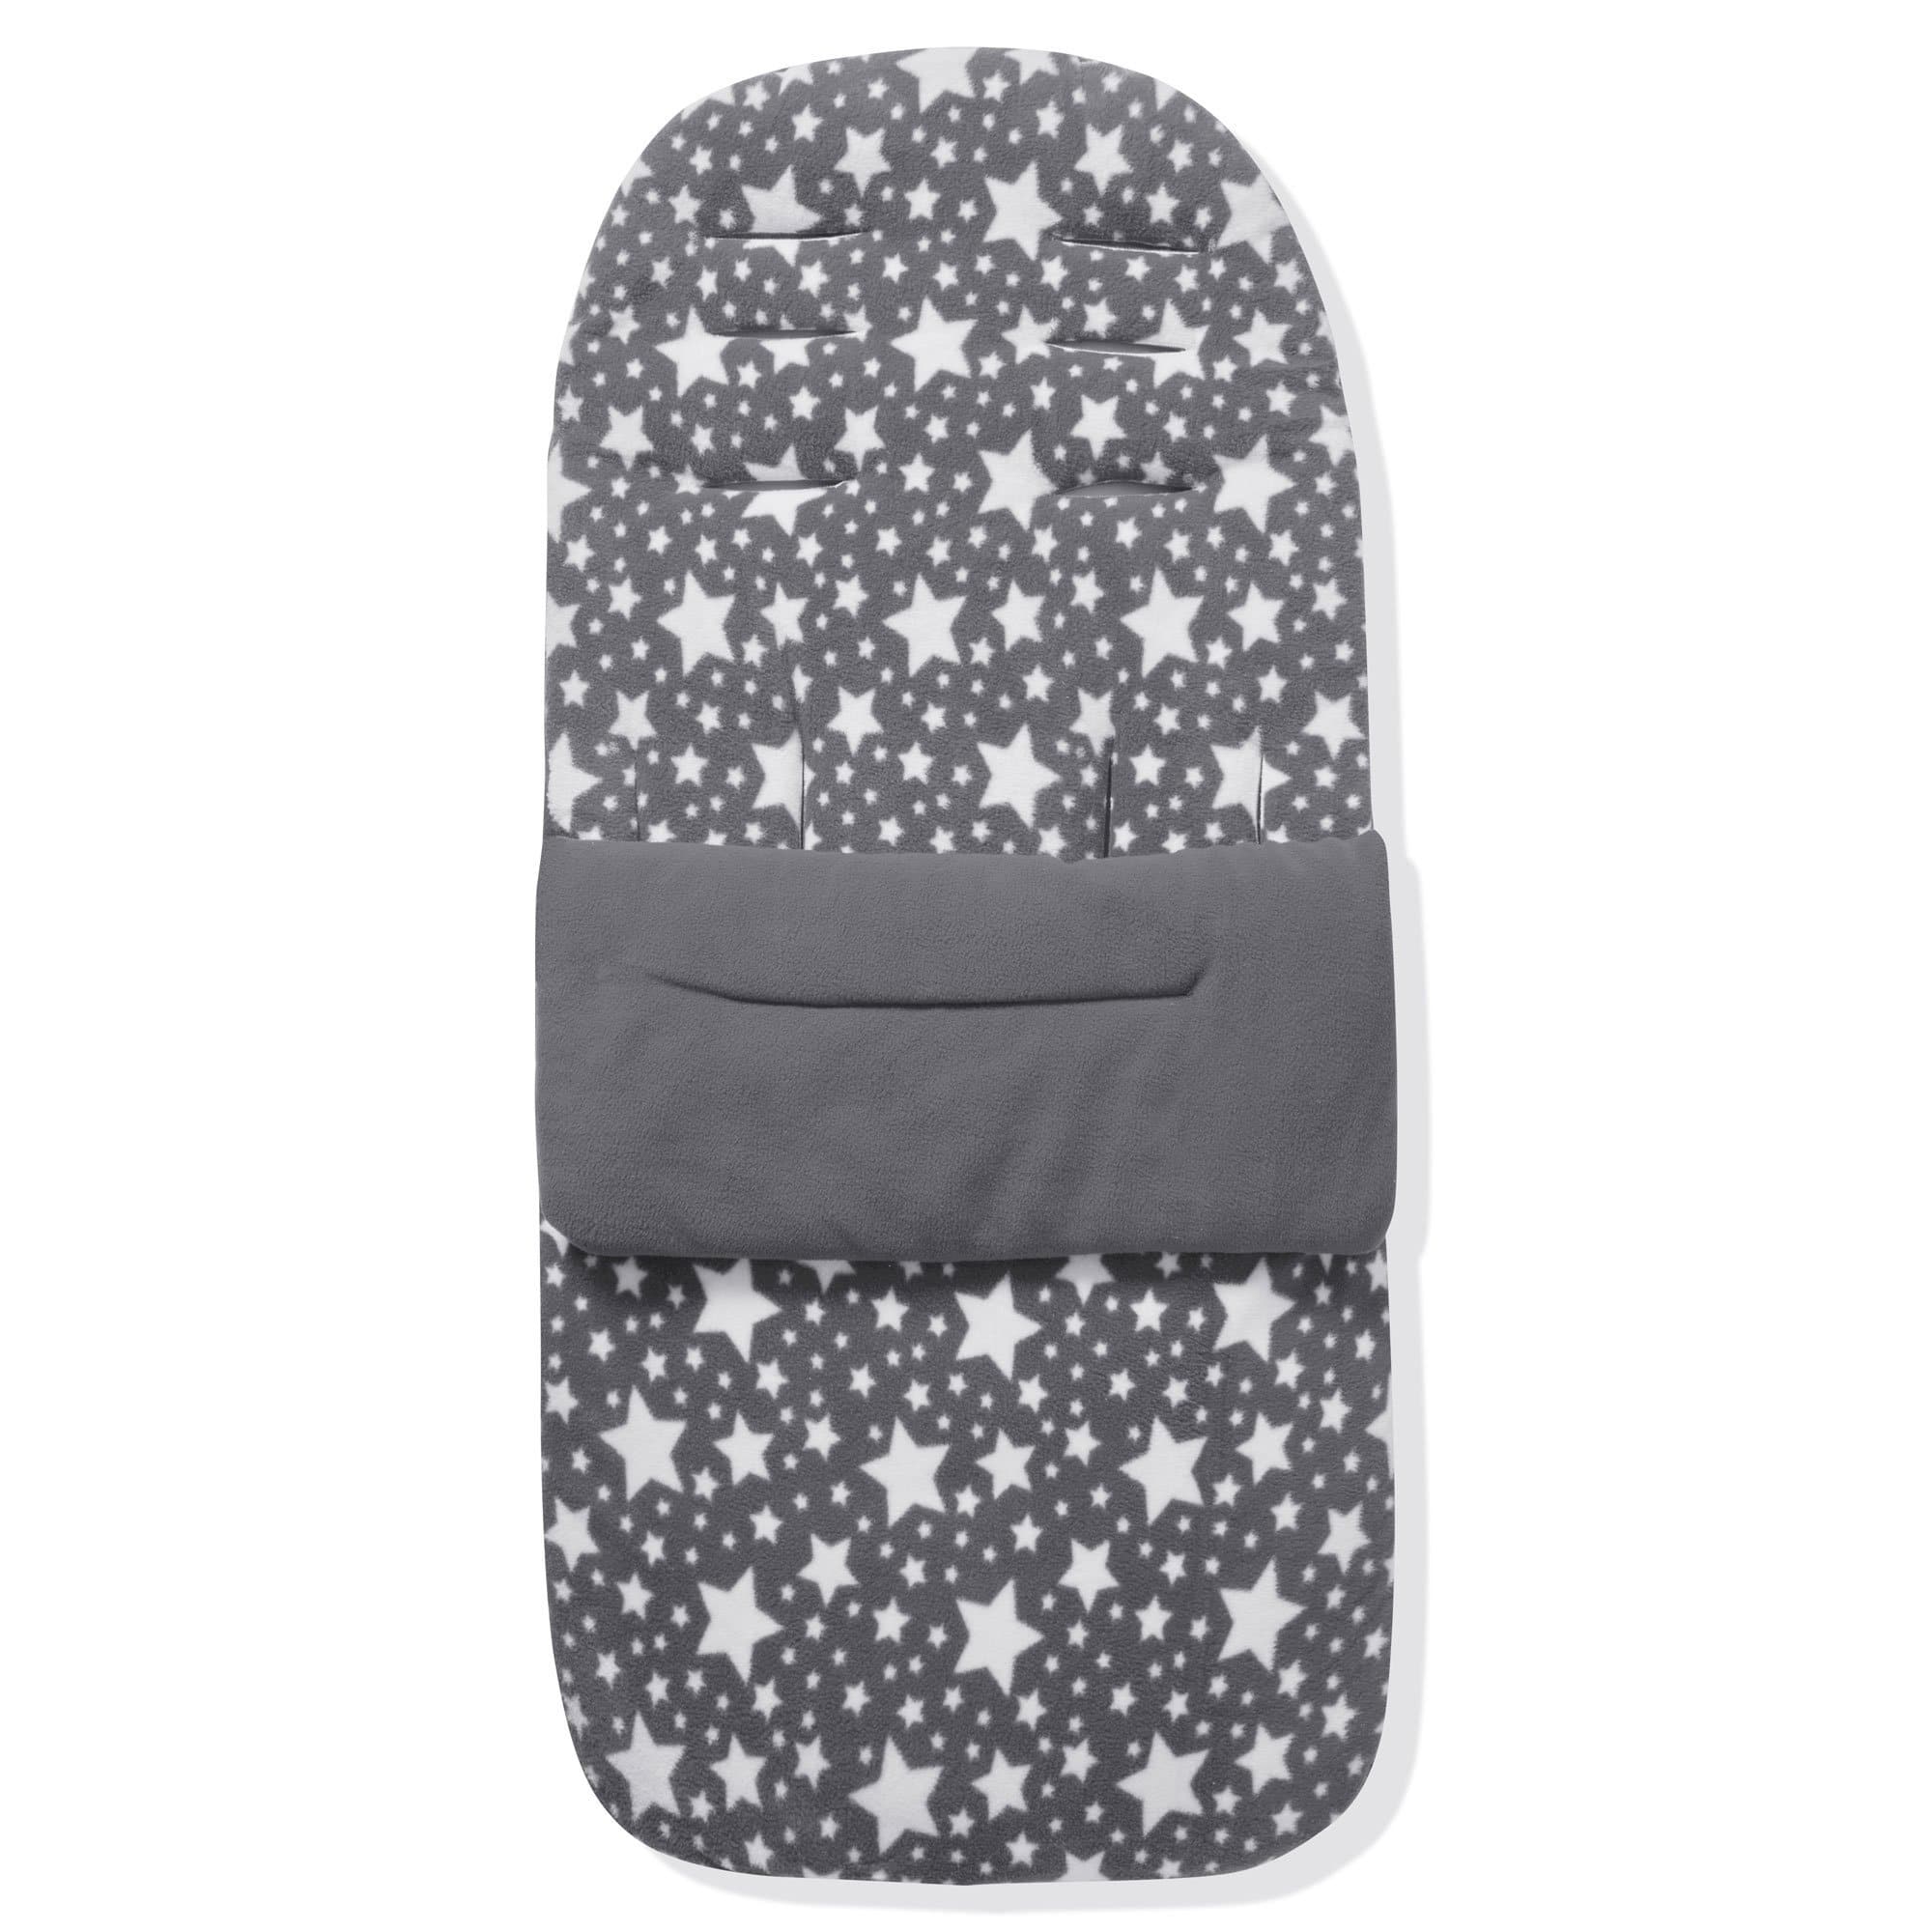 Fleece Footmuff / Cosy Toes Compatible with Infababy - Grey Star / Fits All Models | For Your Little One